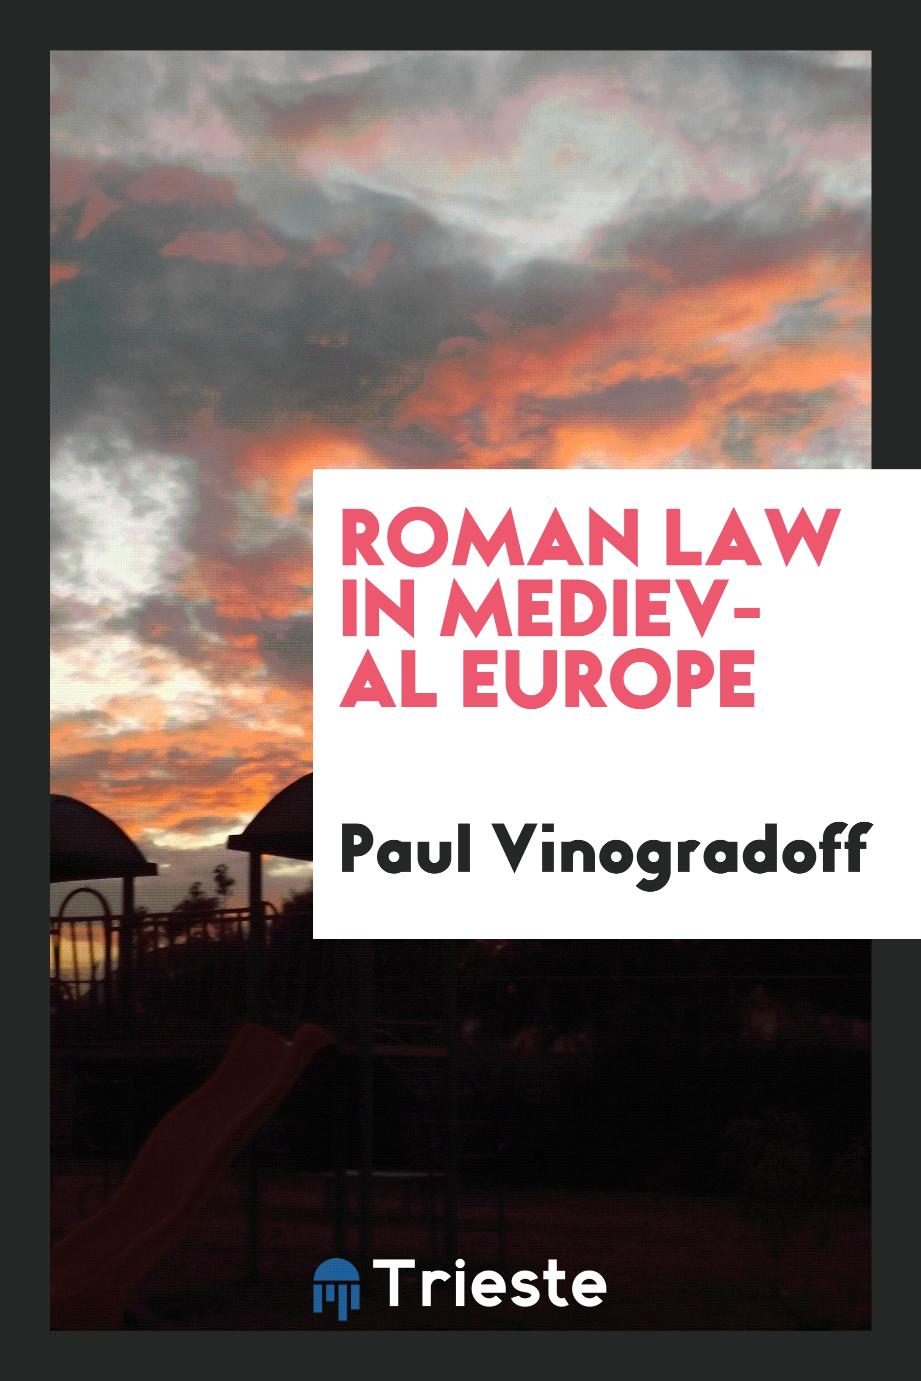 Roman law in medieval Europe